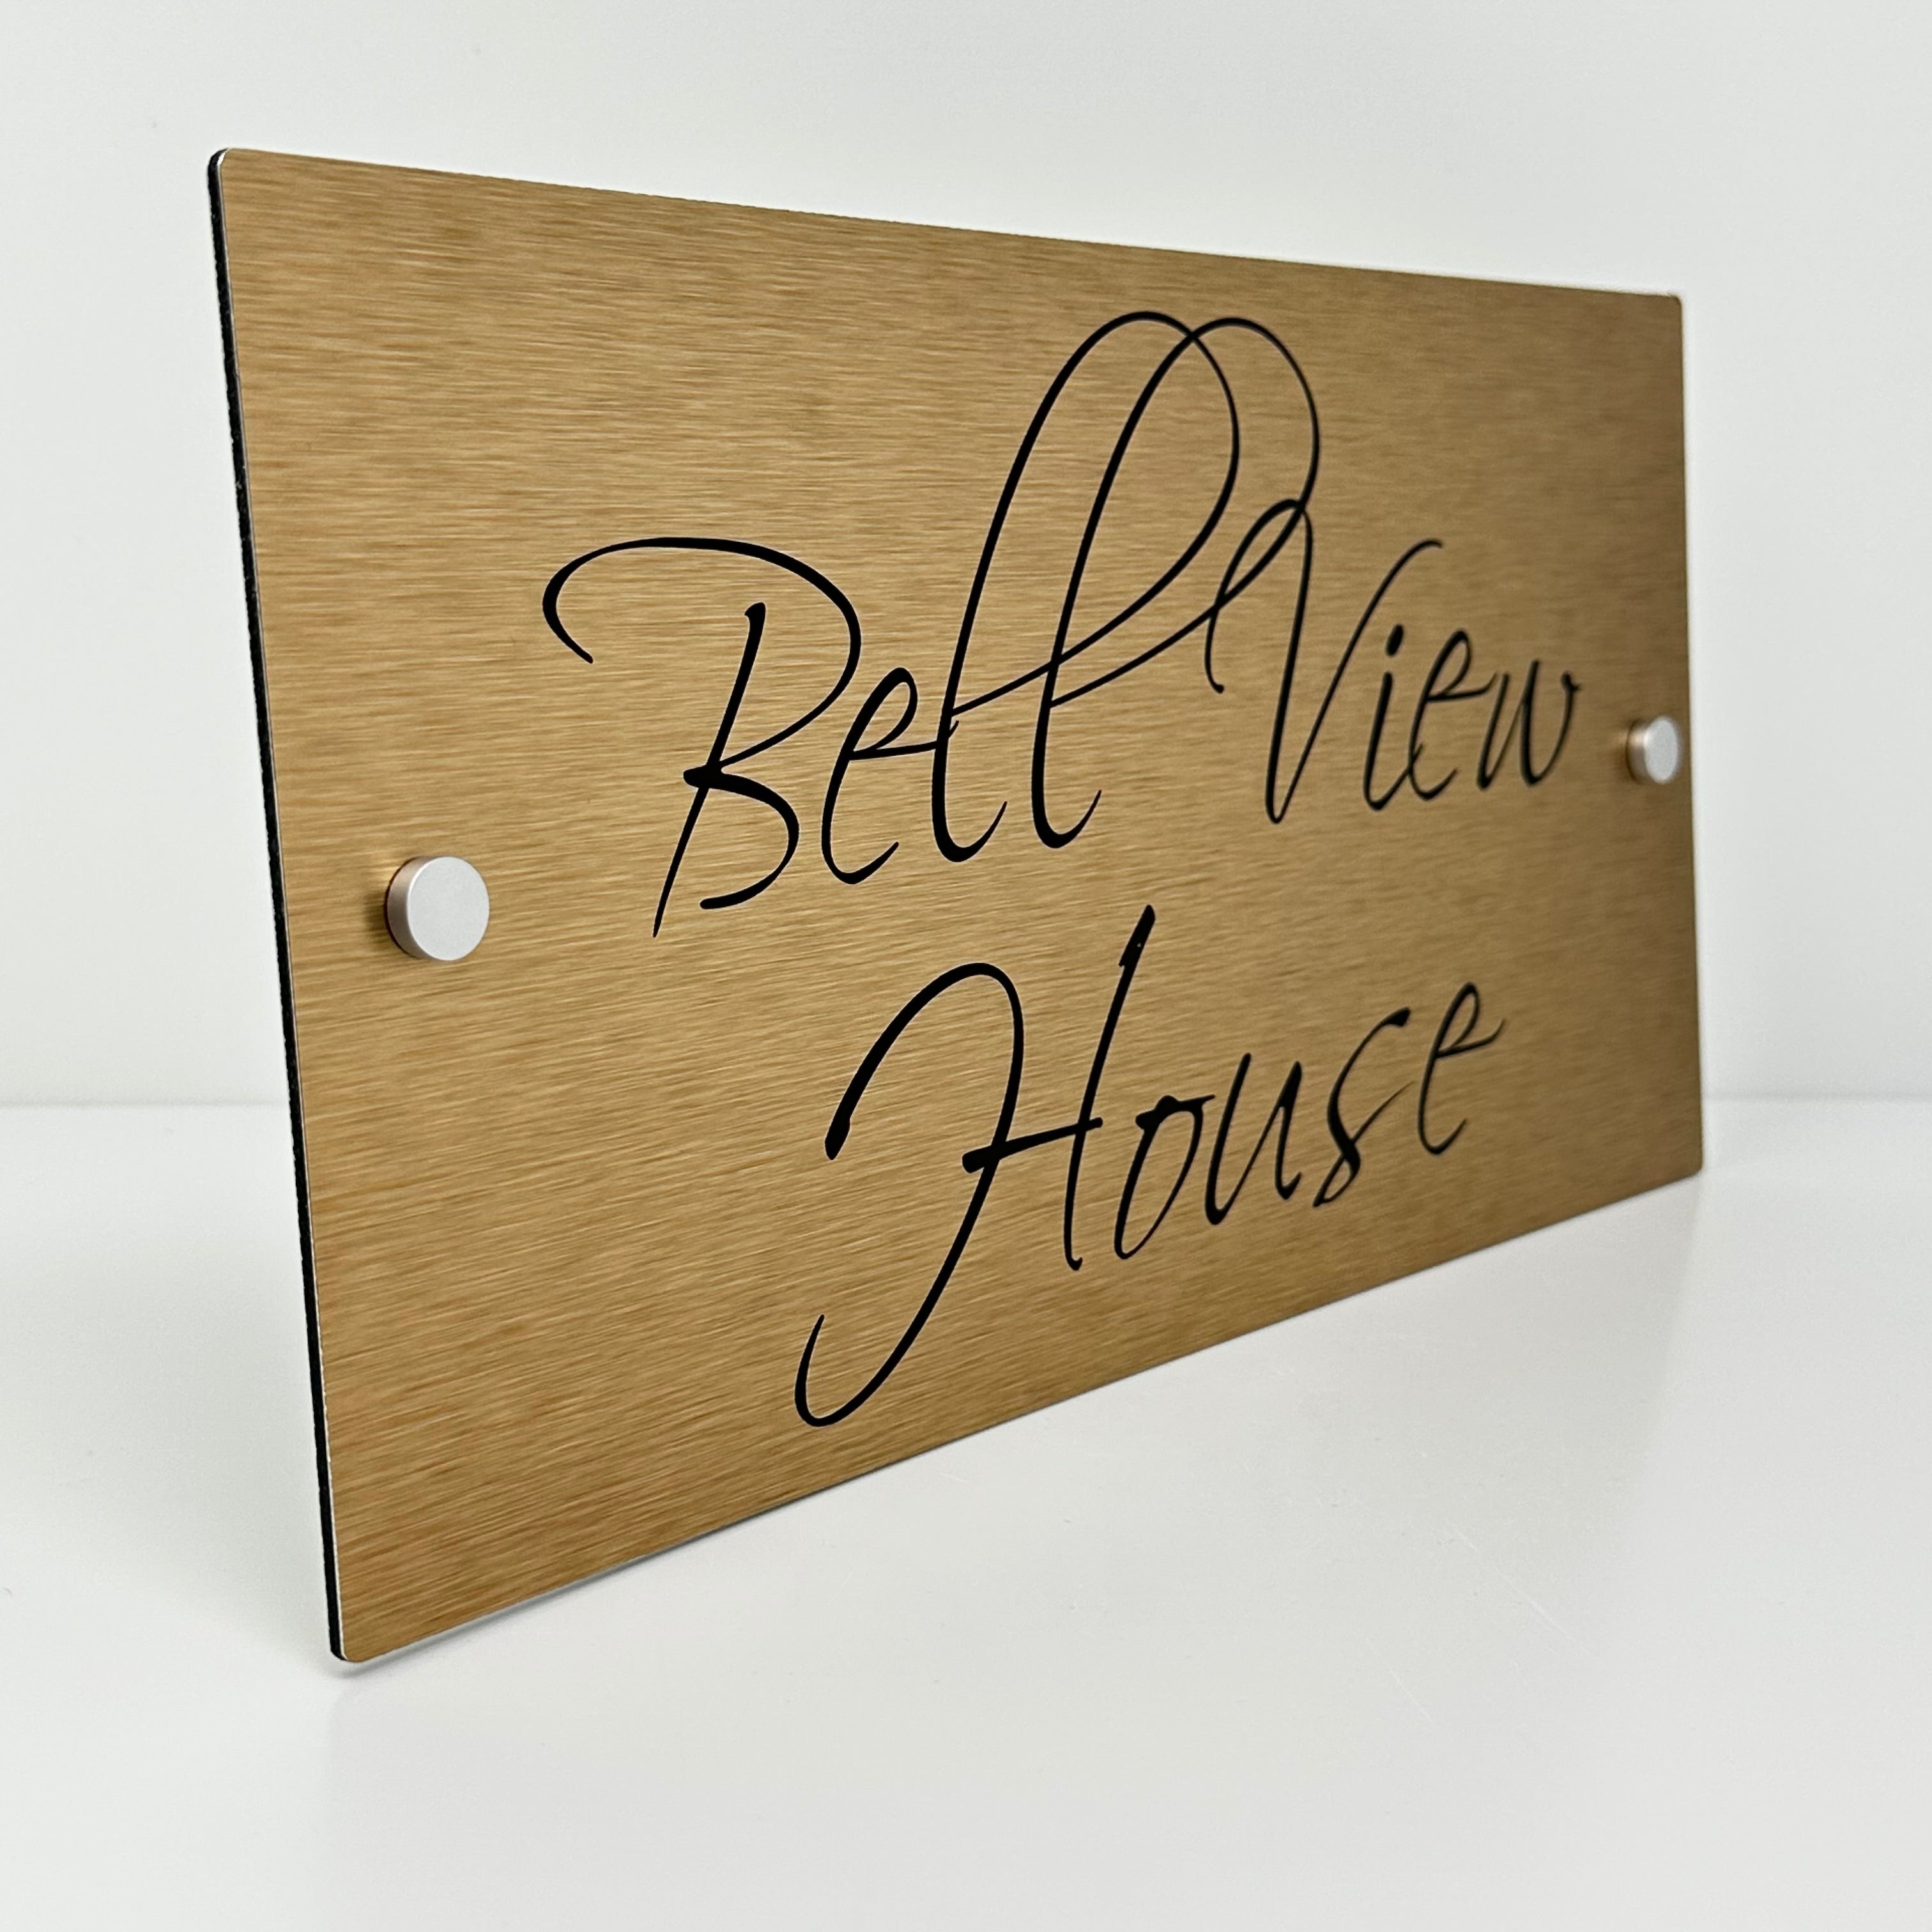 The Bell View Modern House Sign with a Brushed Brass Panel and Satin Silver Stand Off Fixings ( Size - 35cm x 18cm )